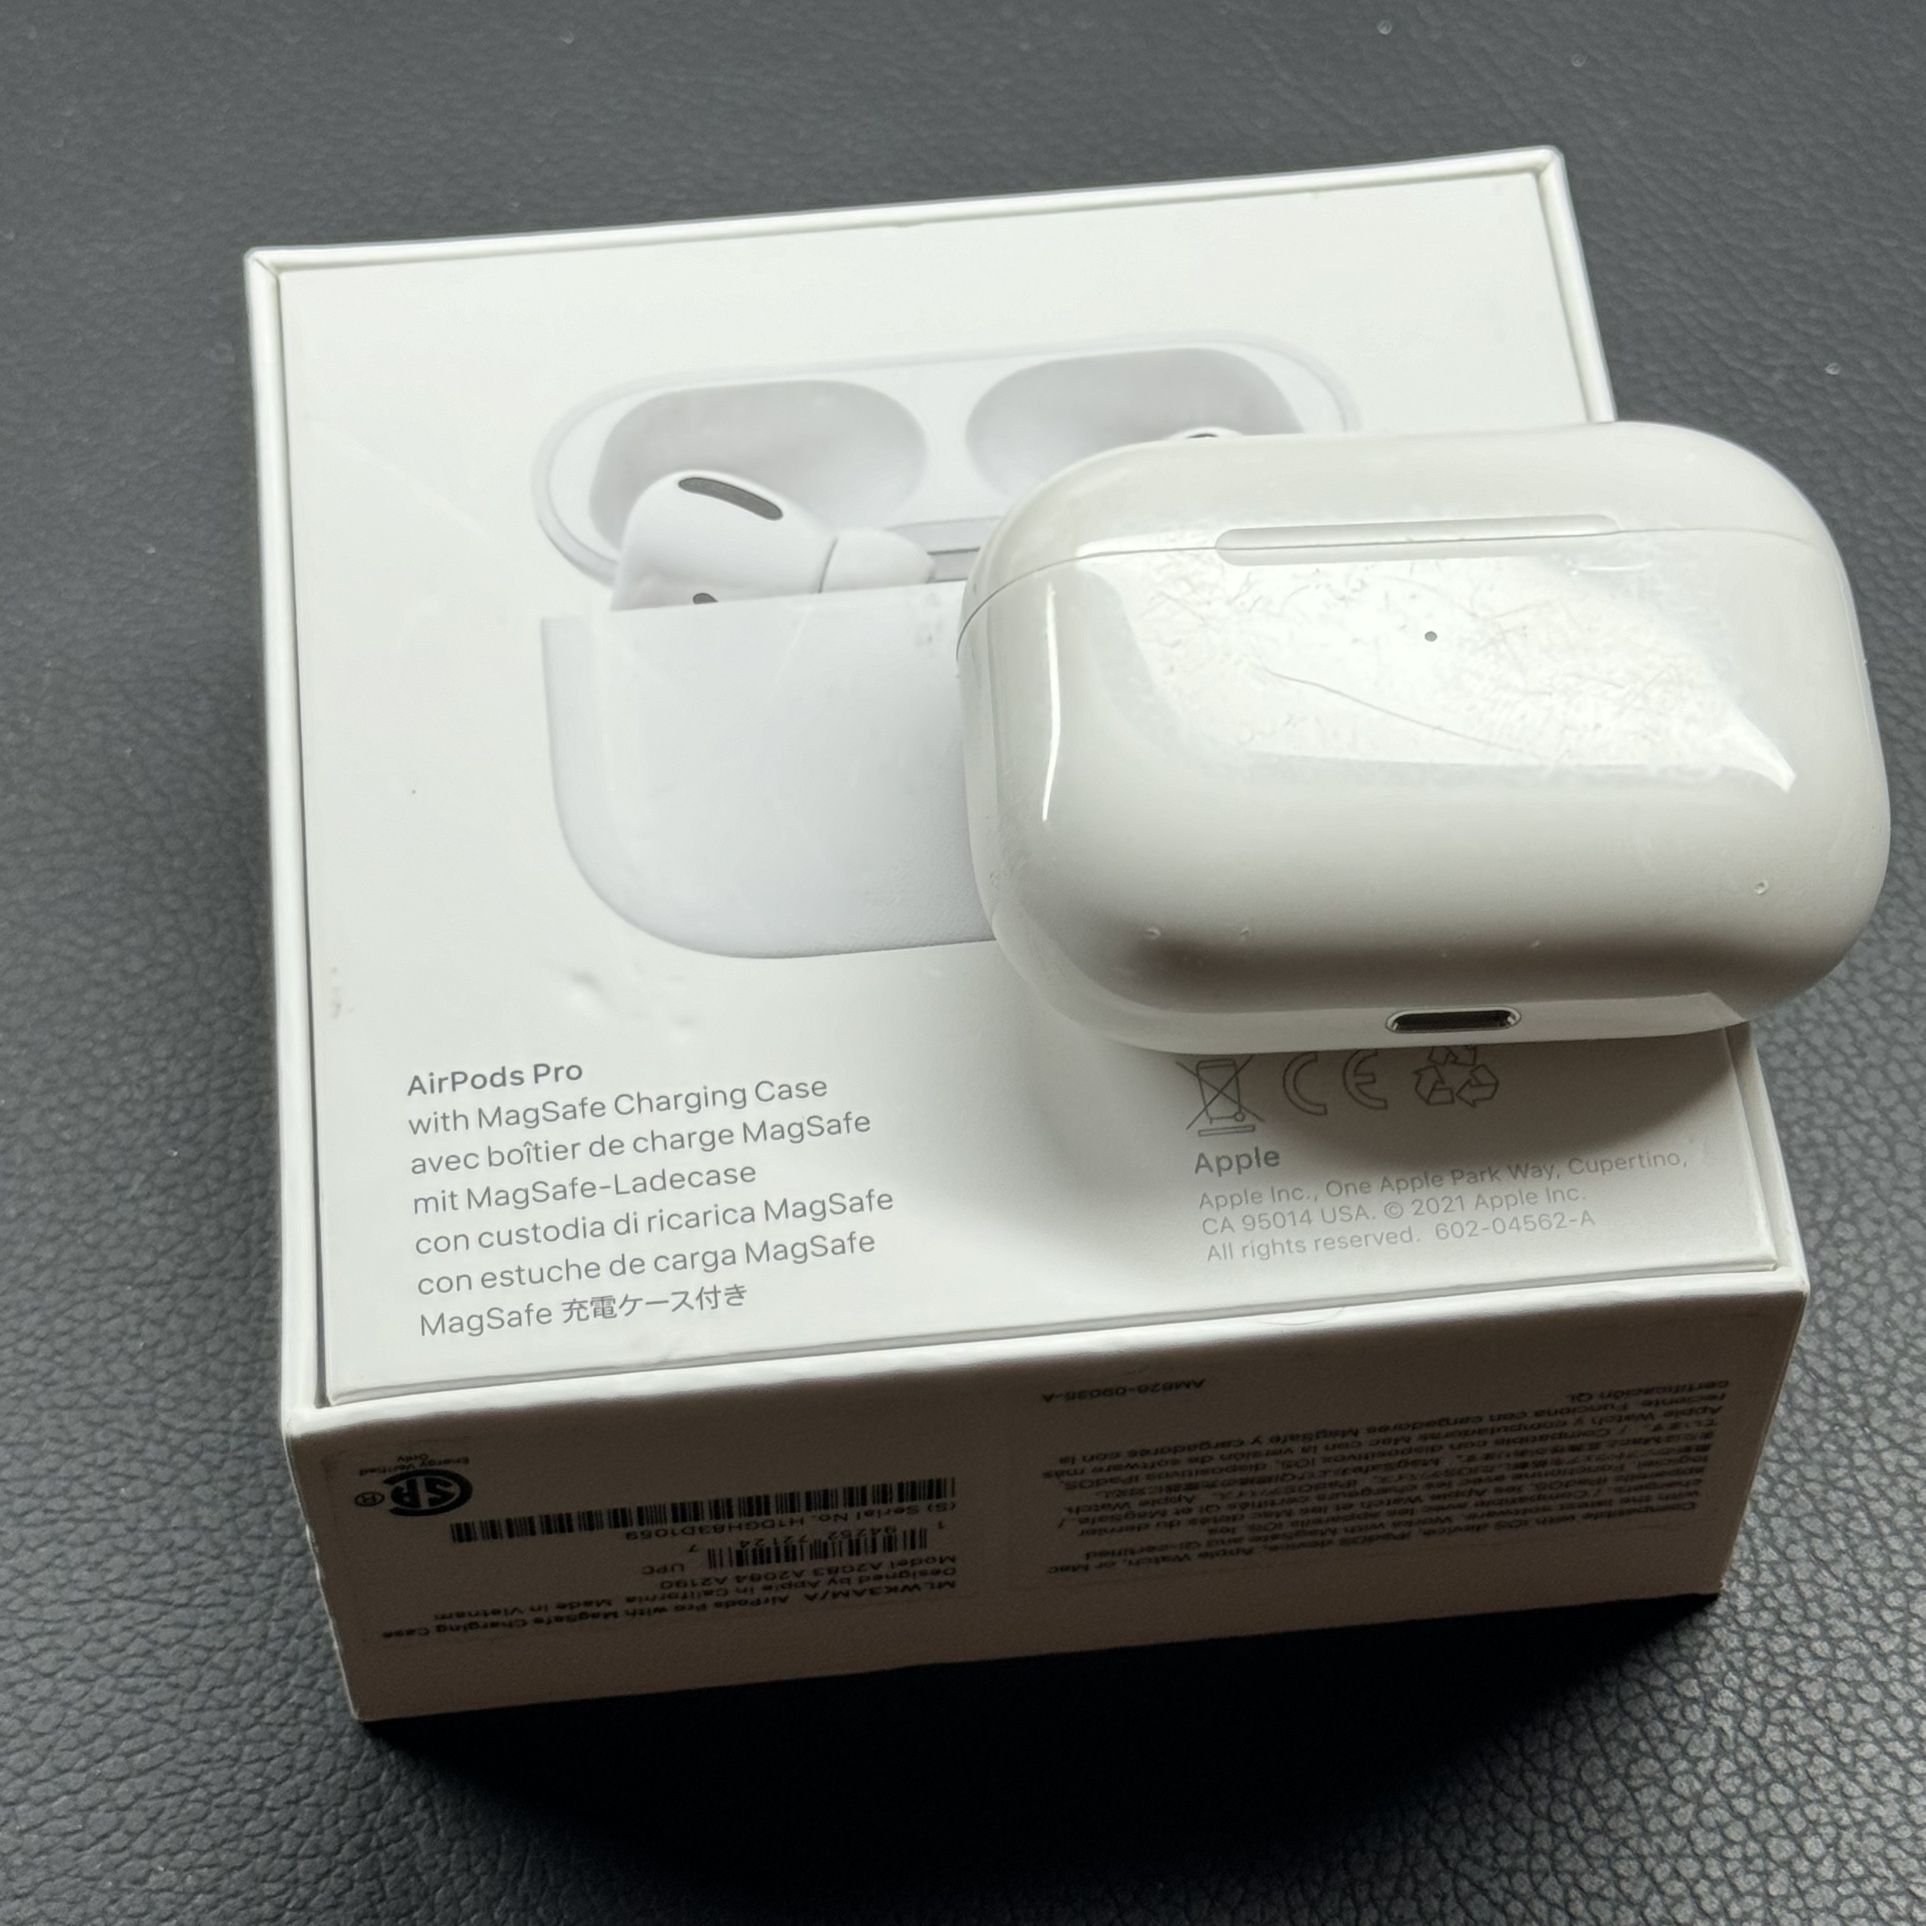  Apple AirPods Pro With MagSafe Charging Case Model A2083 A2084 A2190 MLWK3AM/A Wireless Bluetooth Headphones Earbuds Siri White